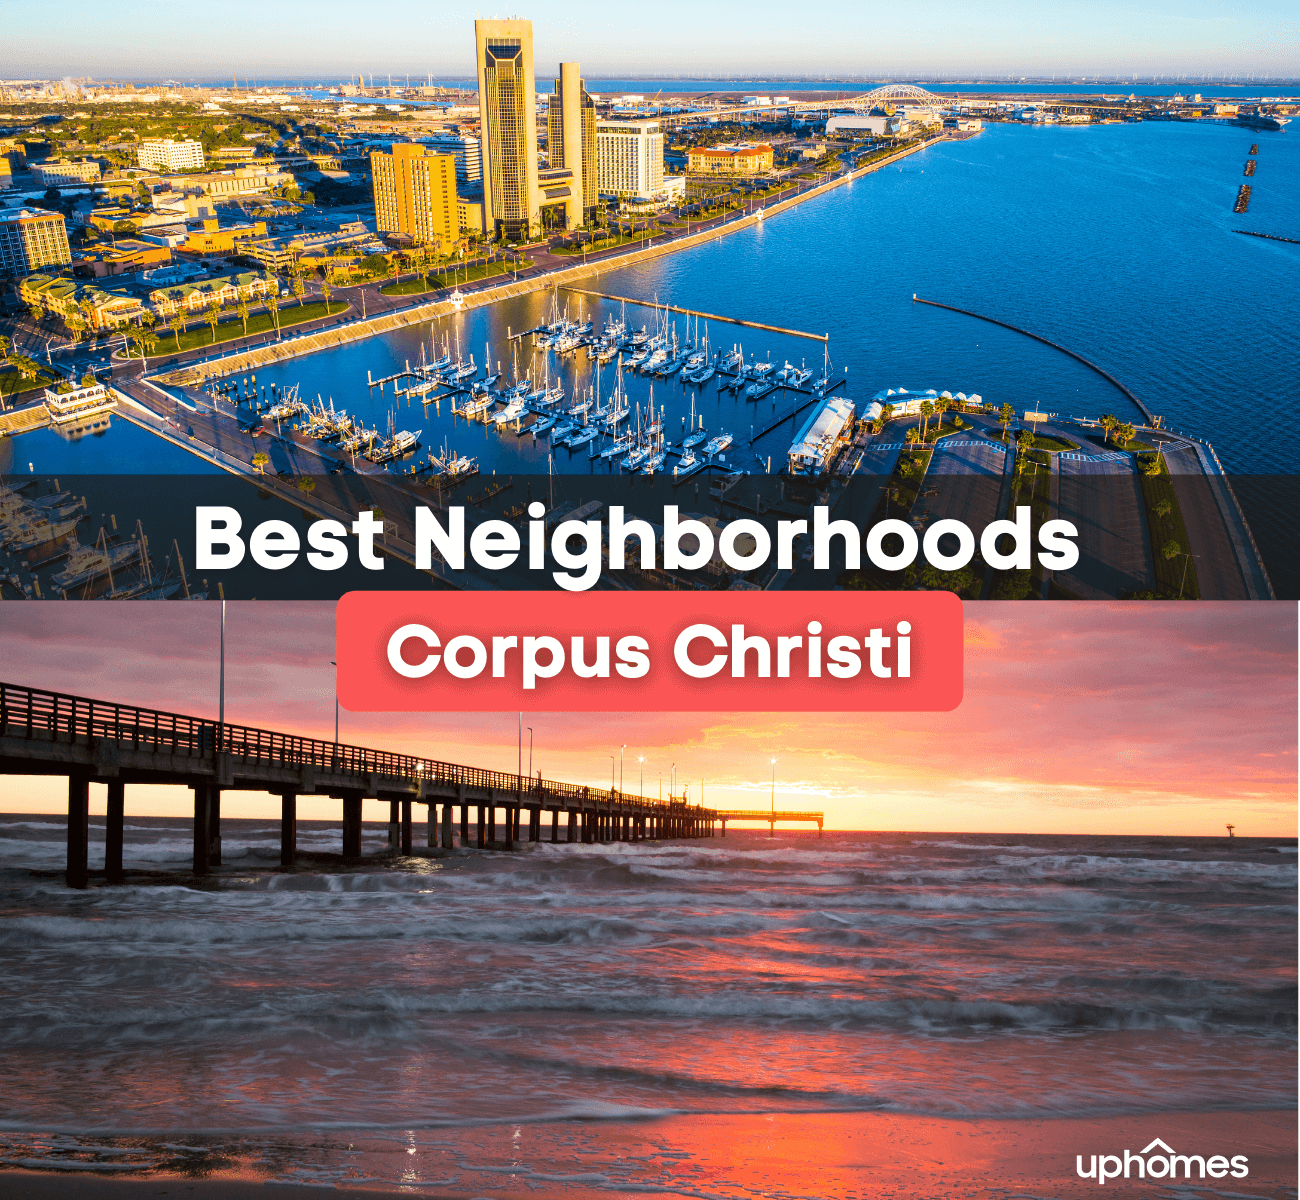 Best neighborhoods in Corpus Christi, TX - What are the best places to live in Corpus Christi, Texas?